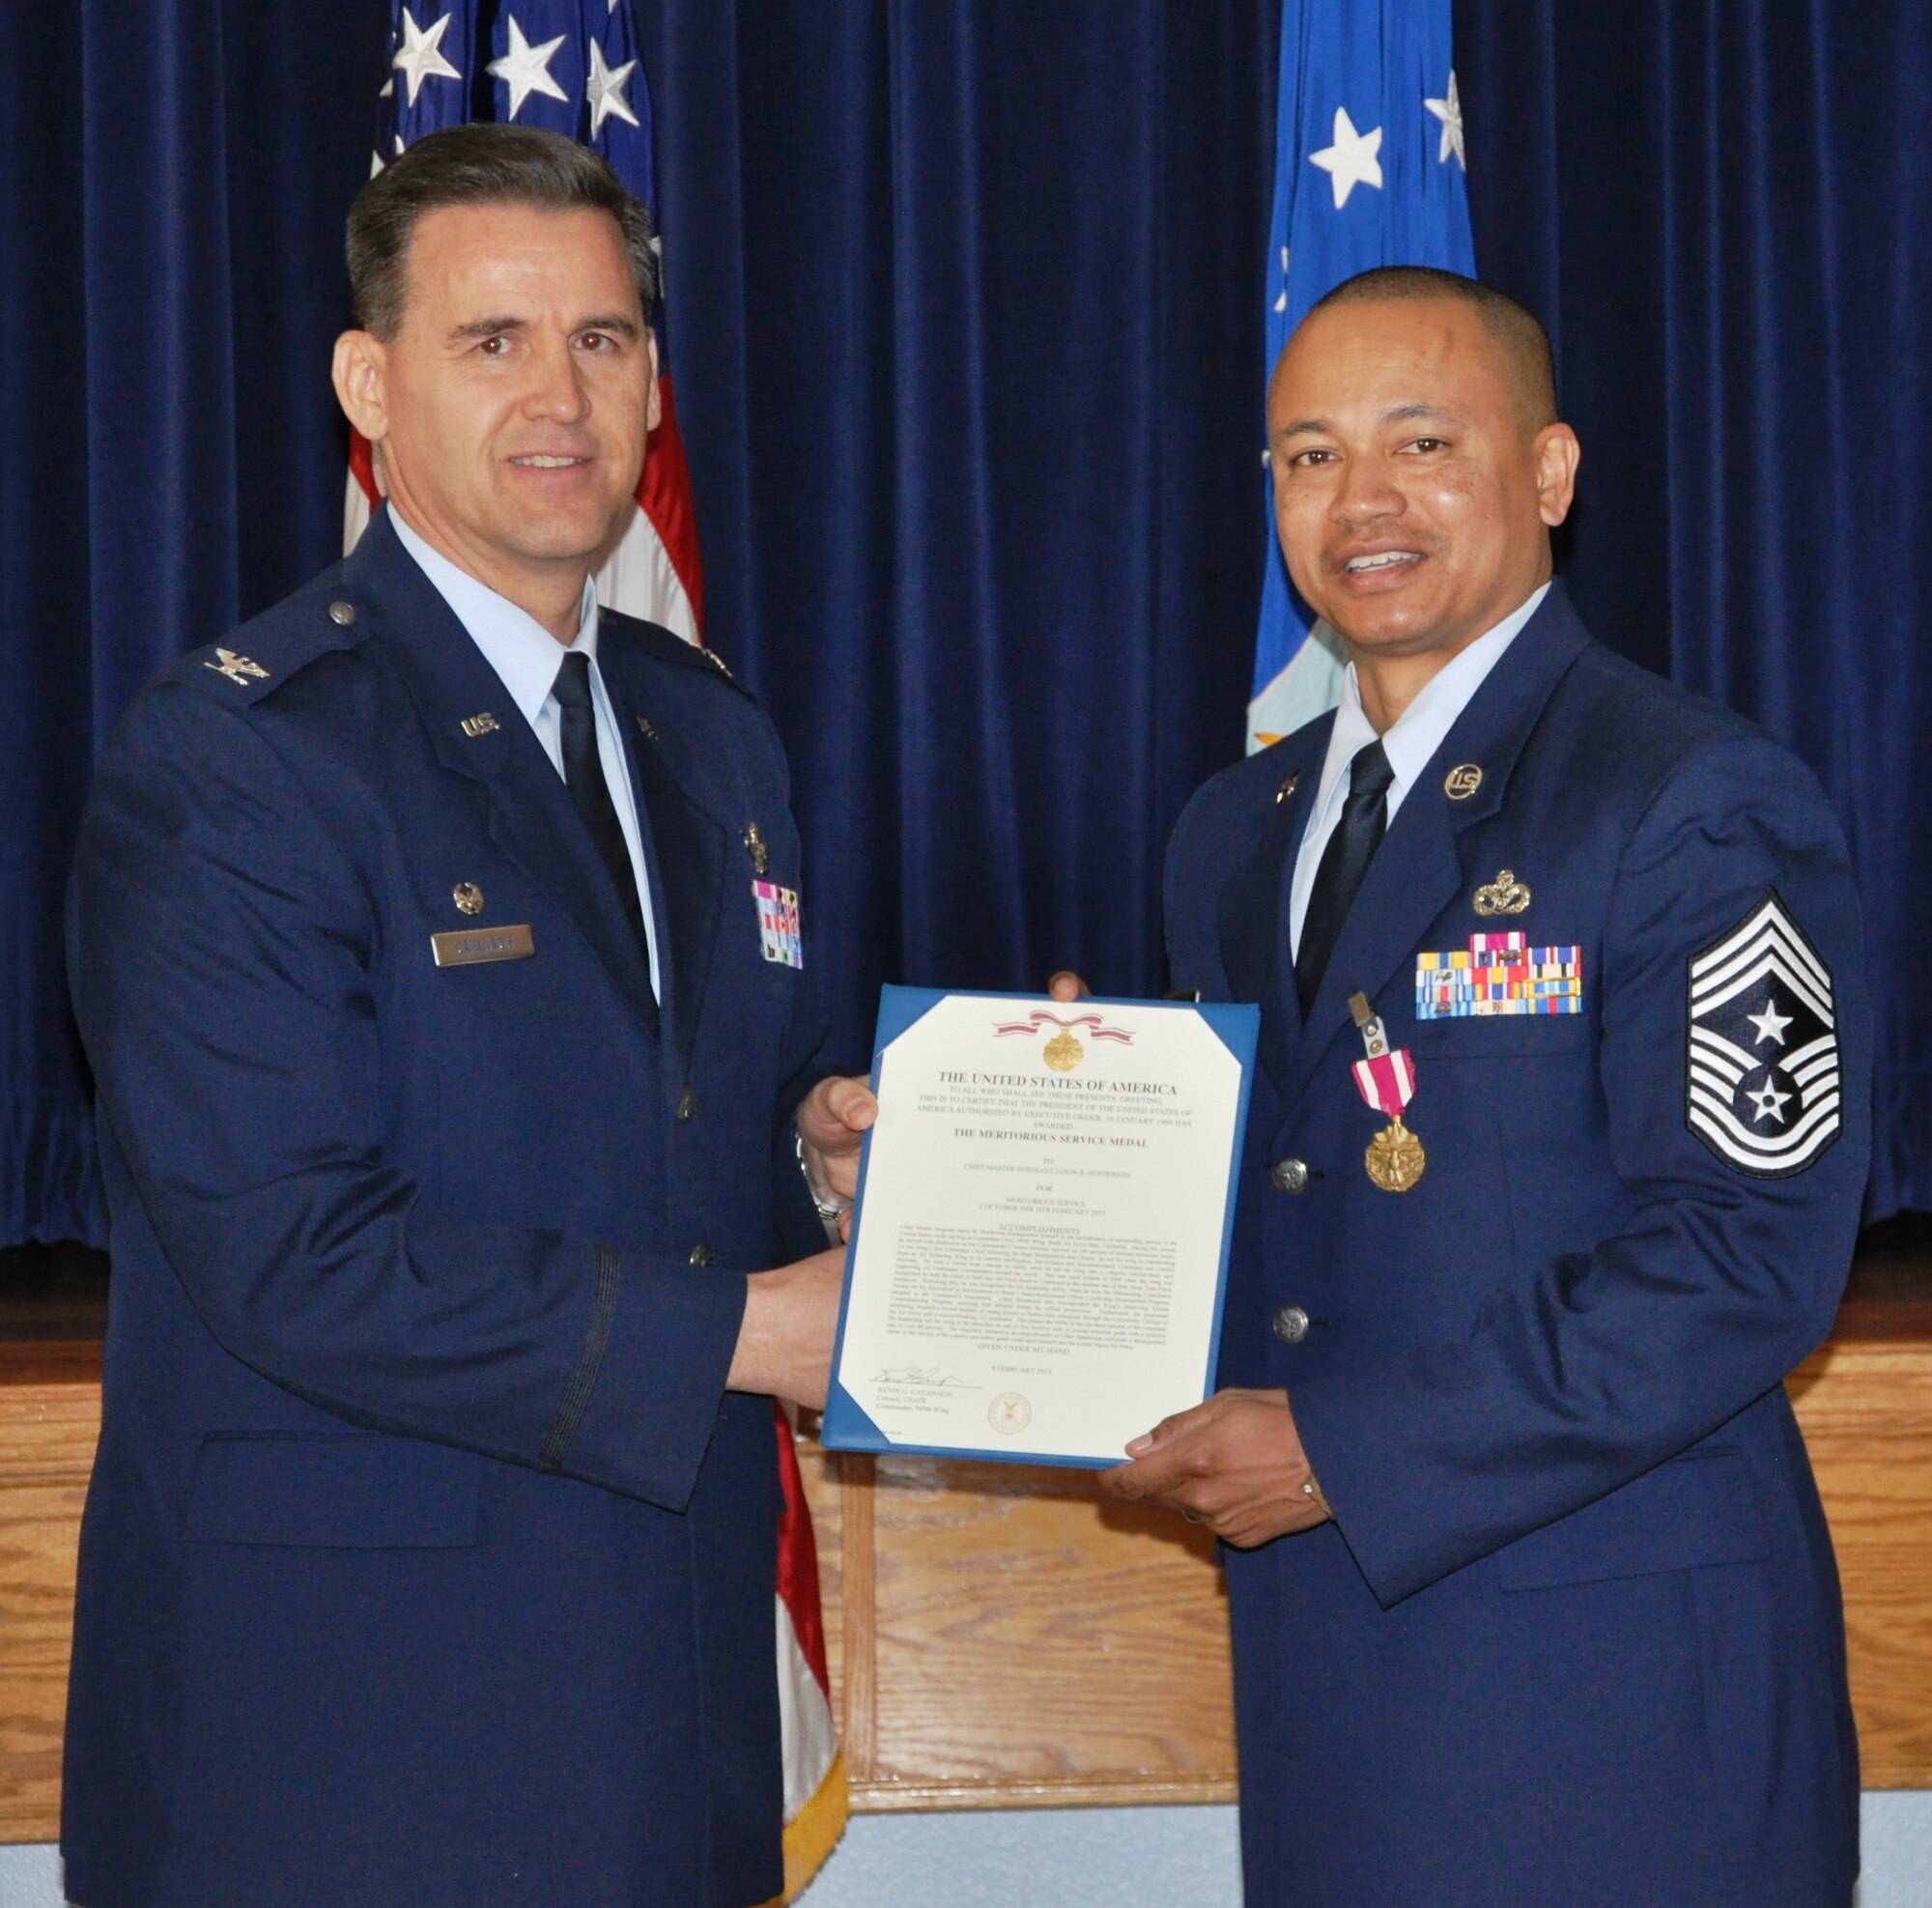 CMSgt Henderson recieves the Meritorious Service Medal from Col Cavanagh, 940th Wing Commander, during his retirement ceremony on Feb 10, during the UTA weekend.  Chief Henderson retires from the US Air Force after 24 years of service, four of which were as the command chief of the 940th Wing. (U.S. Air Force photo/SrA Adam Hamar)